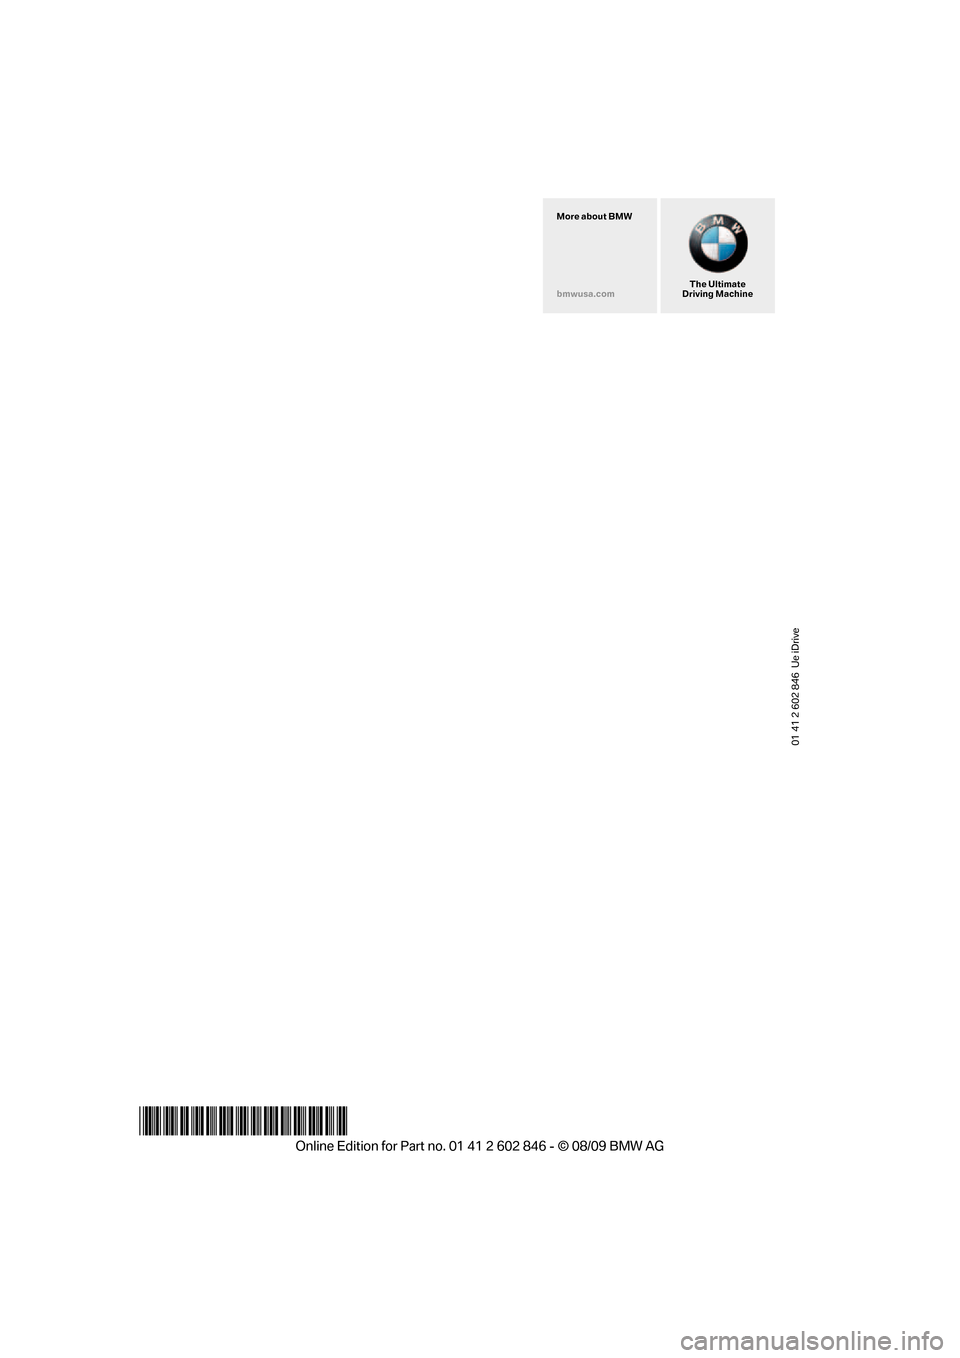 BMW 135I 2010 E81 Owners Manual 01 41 2 602 846  Ue iDrive
*BL2602846006*
The Ultimate
Driving Machine More about BMW
bmwusa.com 